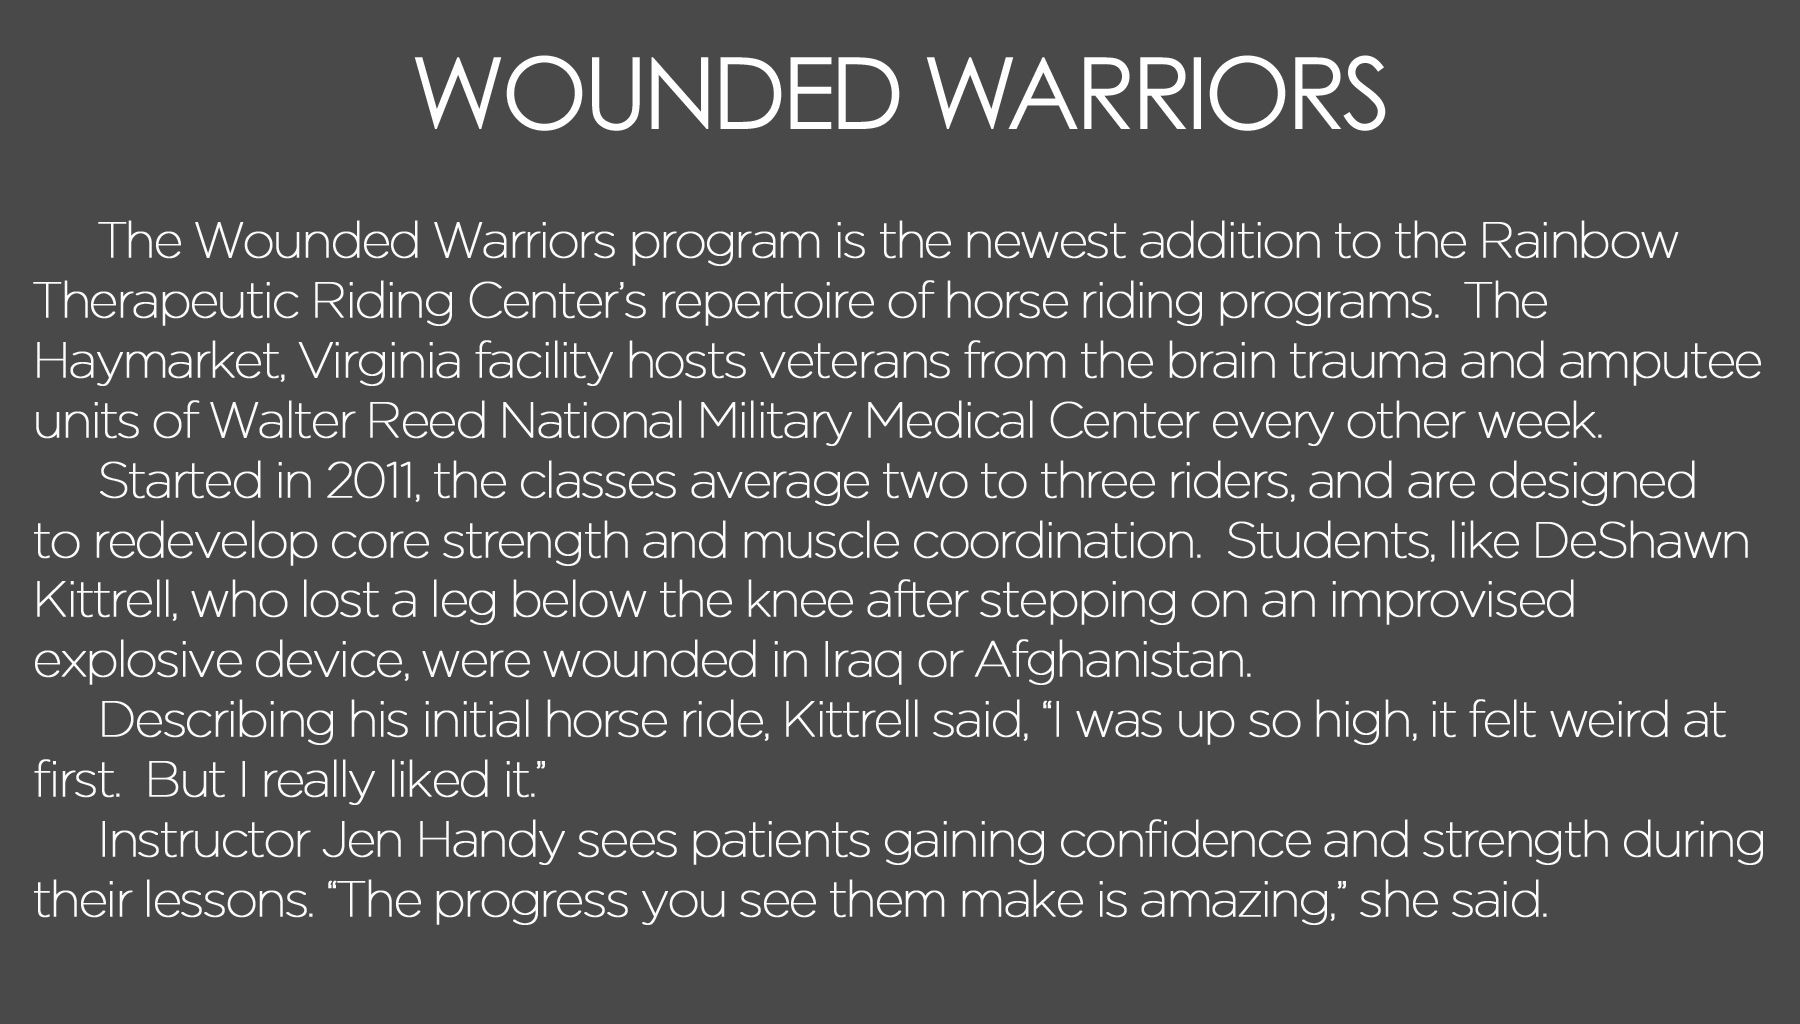 1wounded_warriors_final